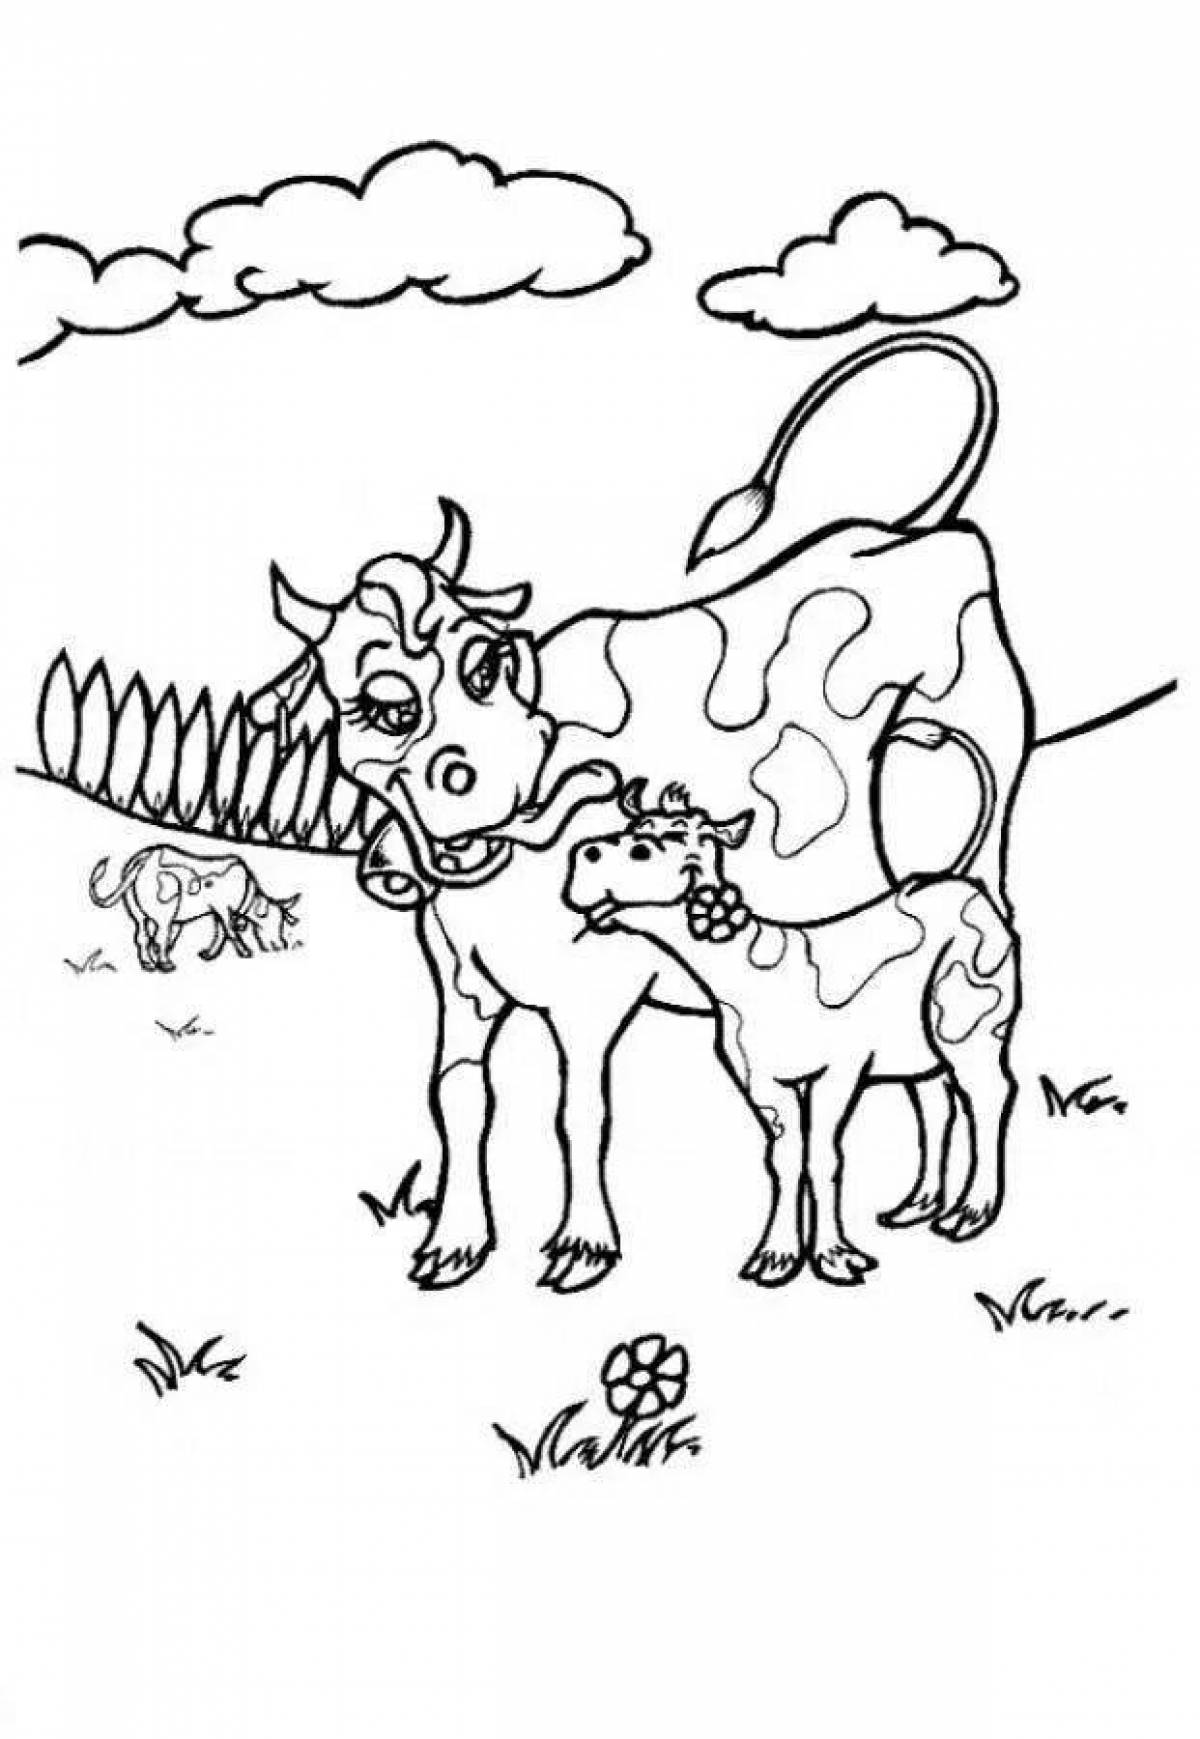 Funny cow and calf coloring book